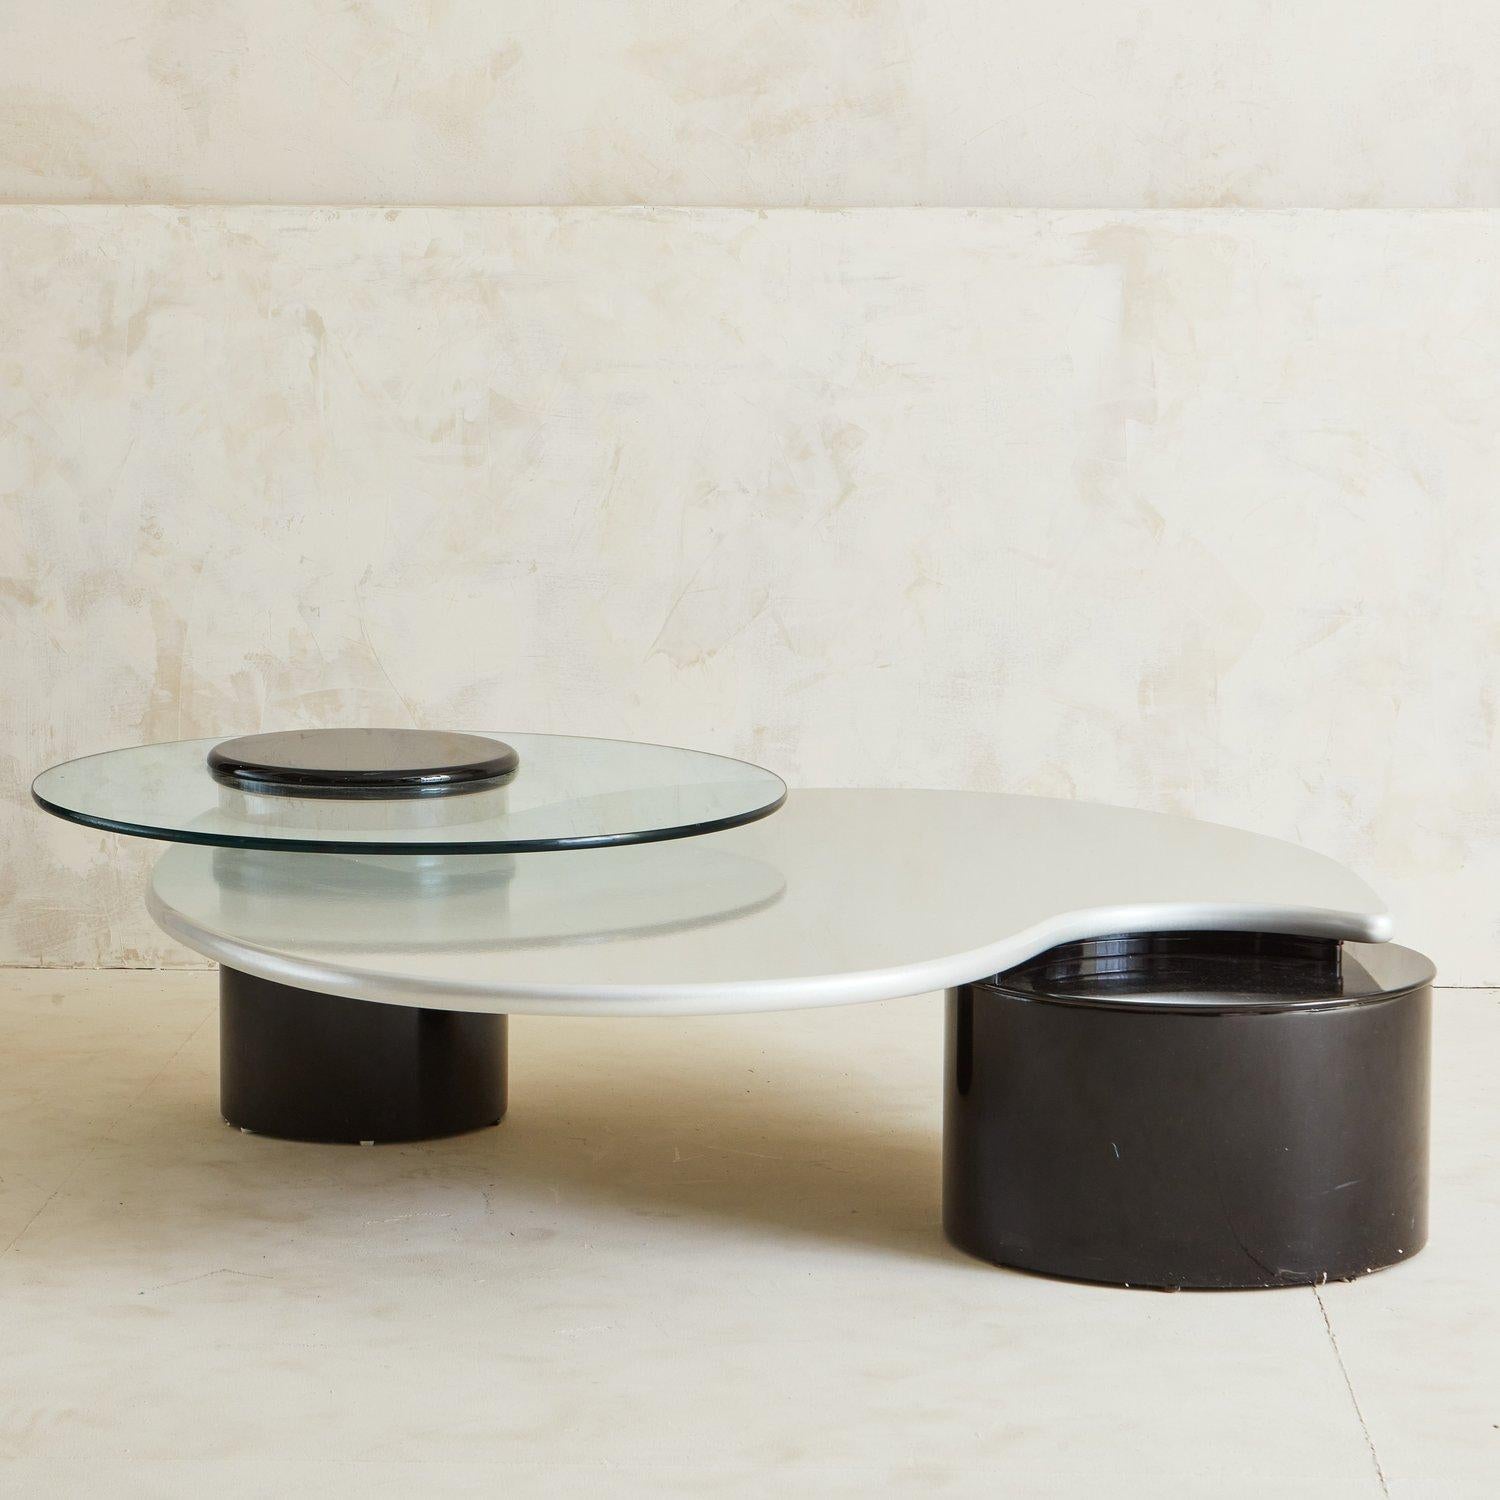 A Post Modern beauty by Canadian brand Rougier. This sculptural table features two large black laminate columns, a pearlized finish laminate table top and a rotating glass top that can swivel out (or be removed entirely).